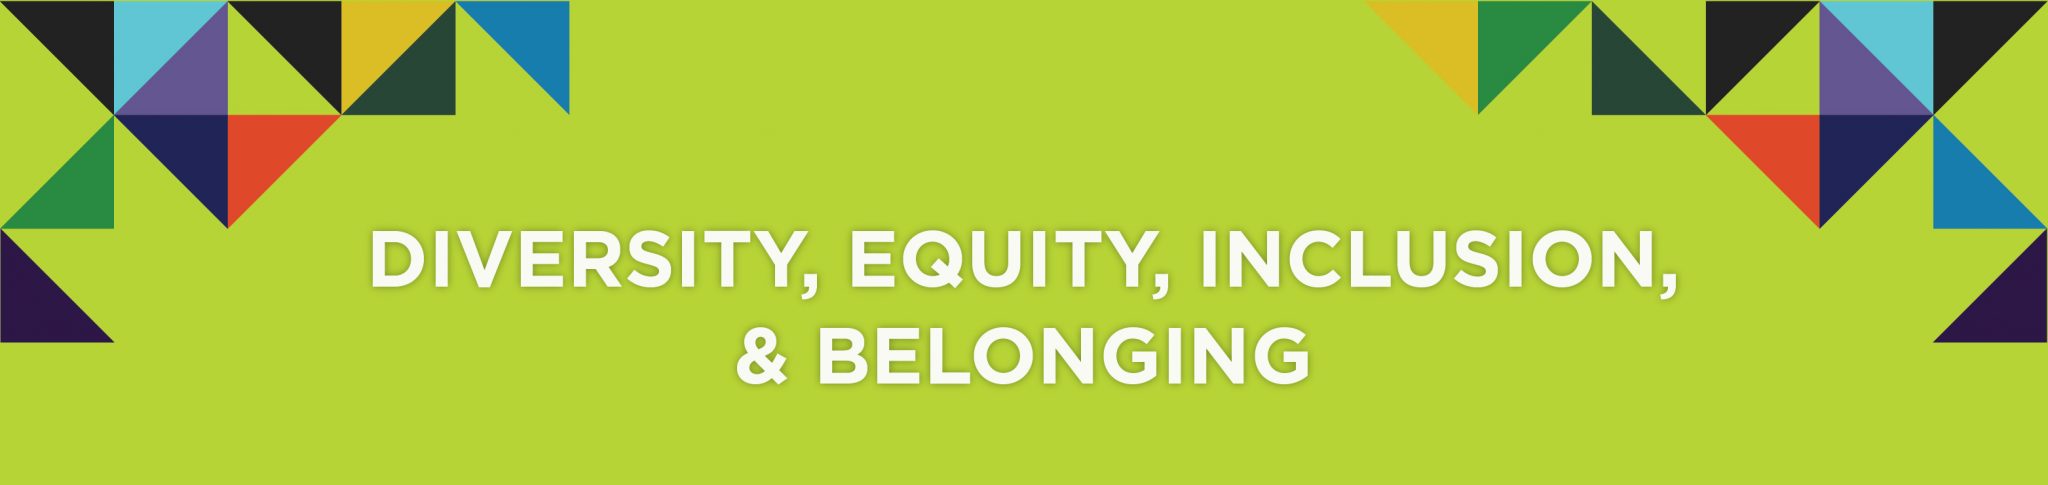 Diversity, equity, inclusion and belonging